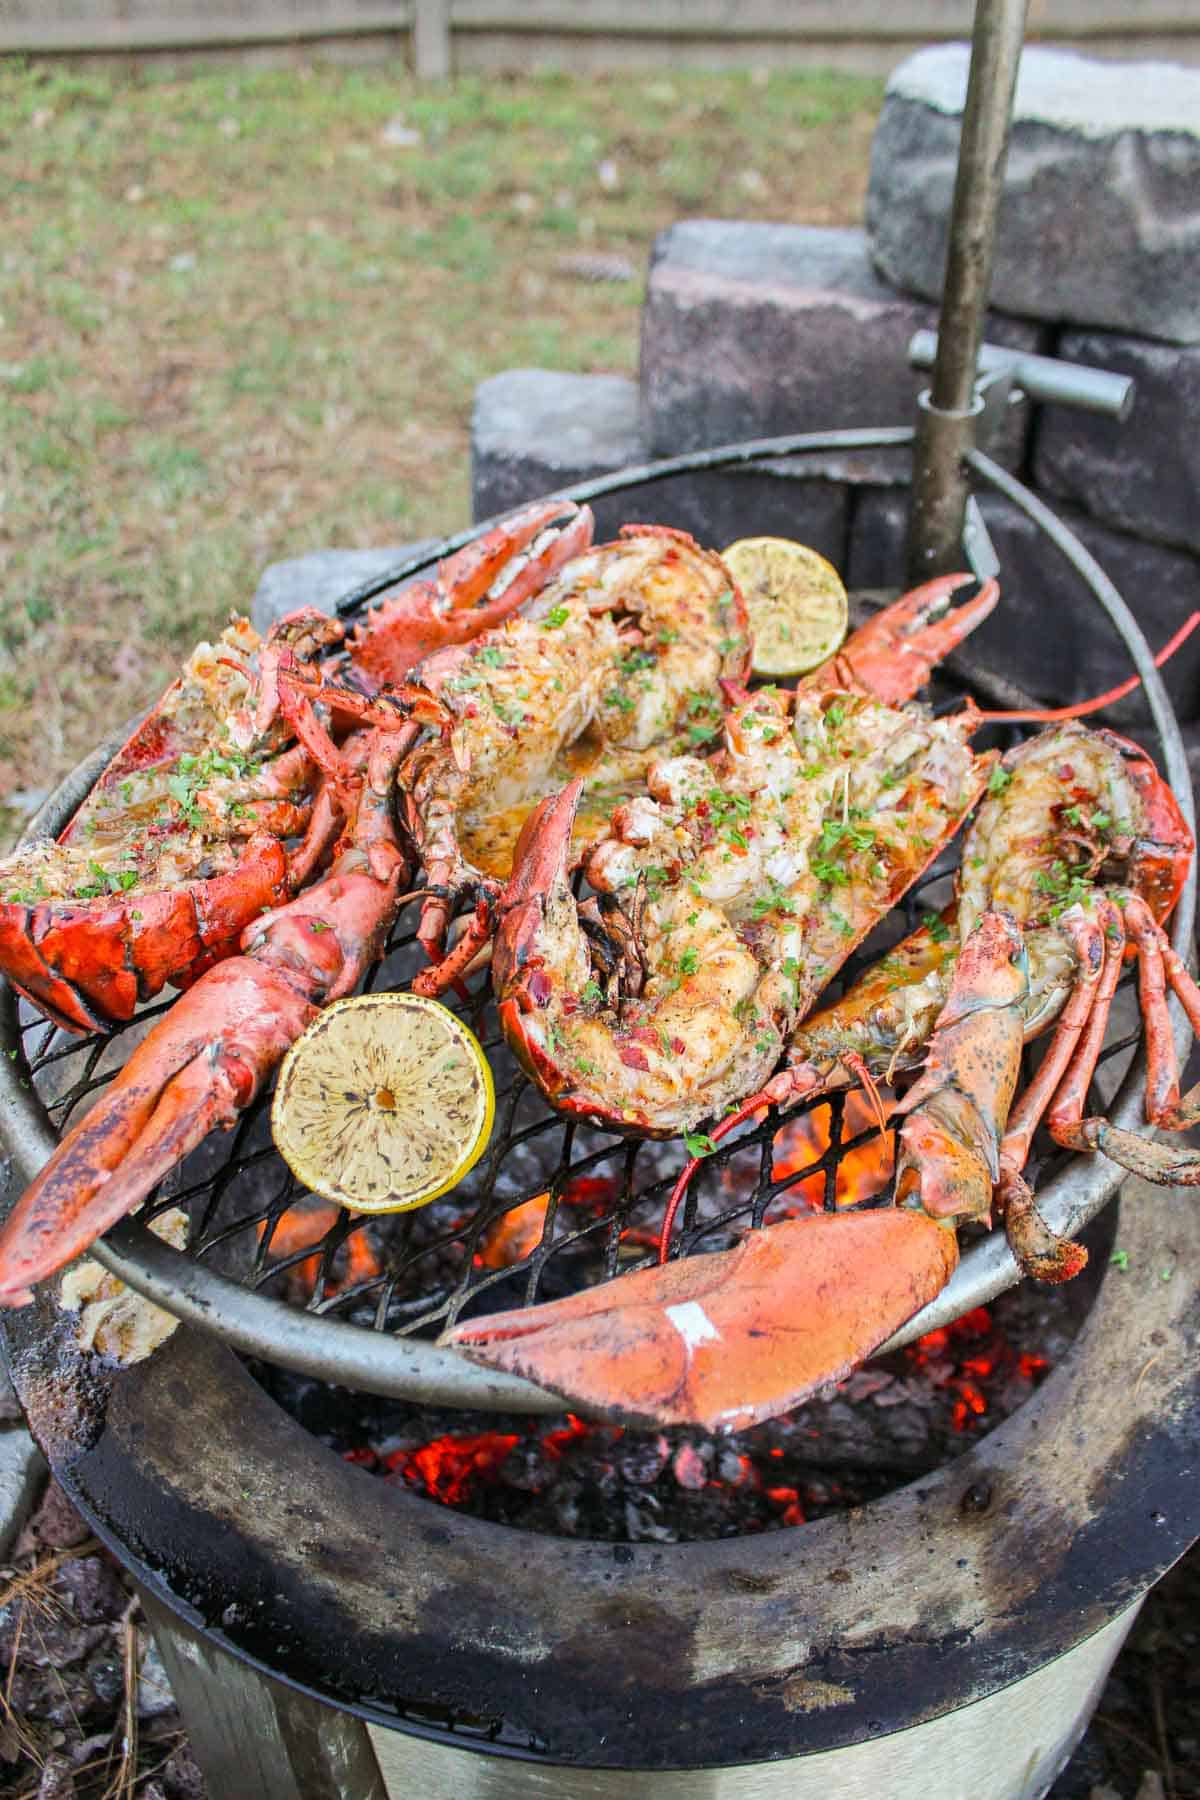 A shot of the lobsters being grilled over the flames.